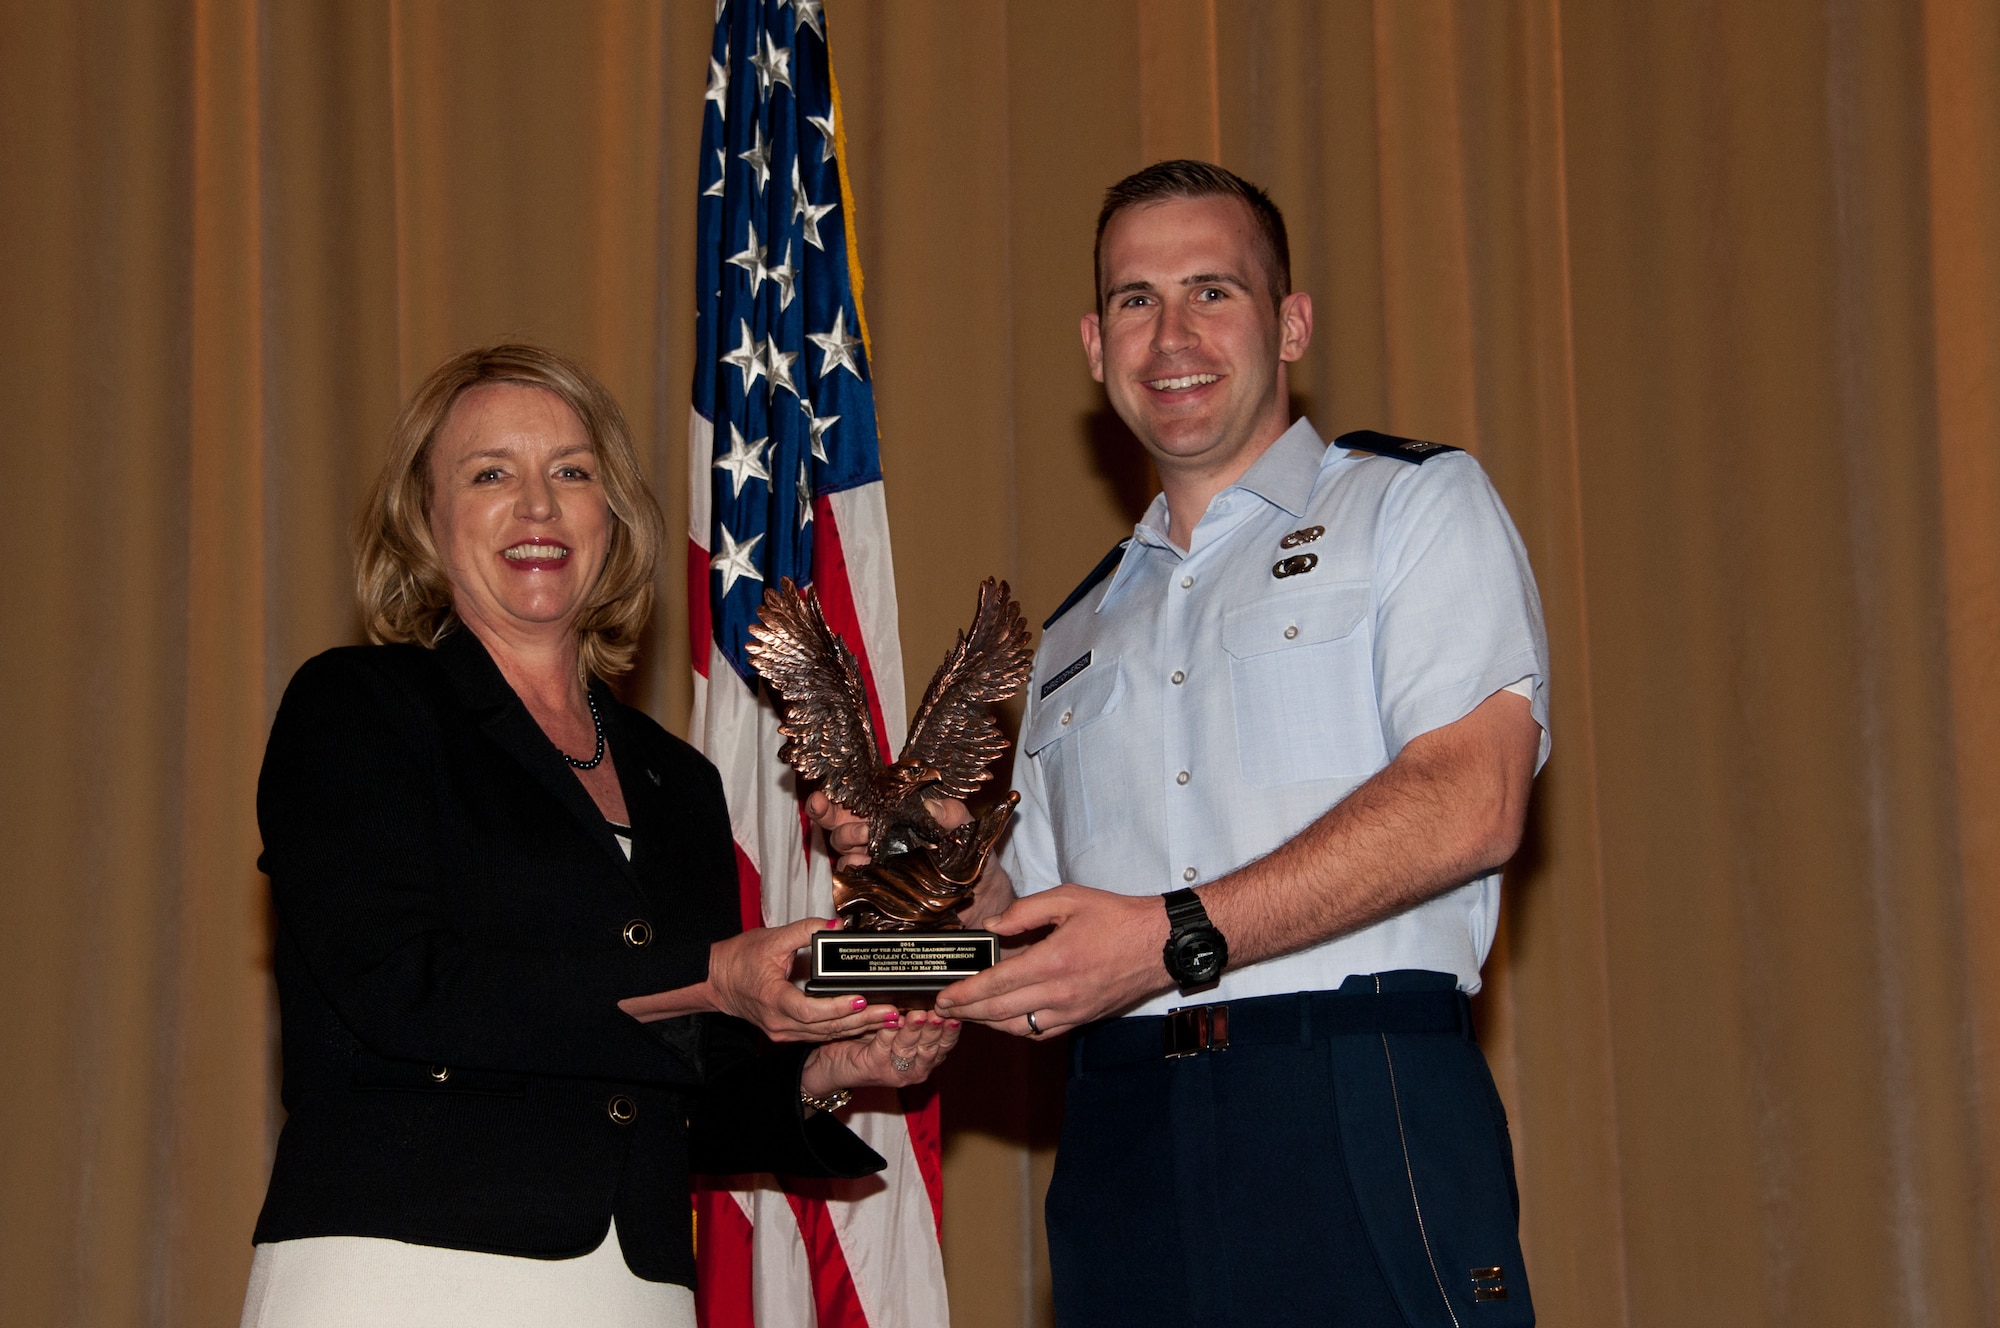 Secretary of the Air Force Deborah Lee James presents the 2014 Secretary of the Air Force leadership award to Squadron Officer School student Capt. Collin Christopherson, May 5, at Maxwell Air Force Base, Ala. The award is the Air Force's most prestigious award for leadership honoring exceptional performance in a professional military education setting. (U.S. Air Force photo/Bud Hancock)